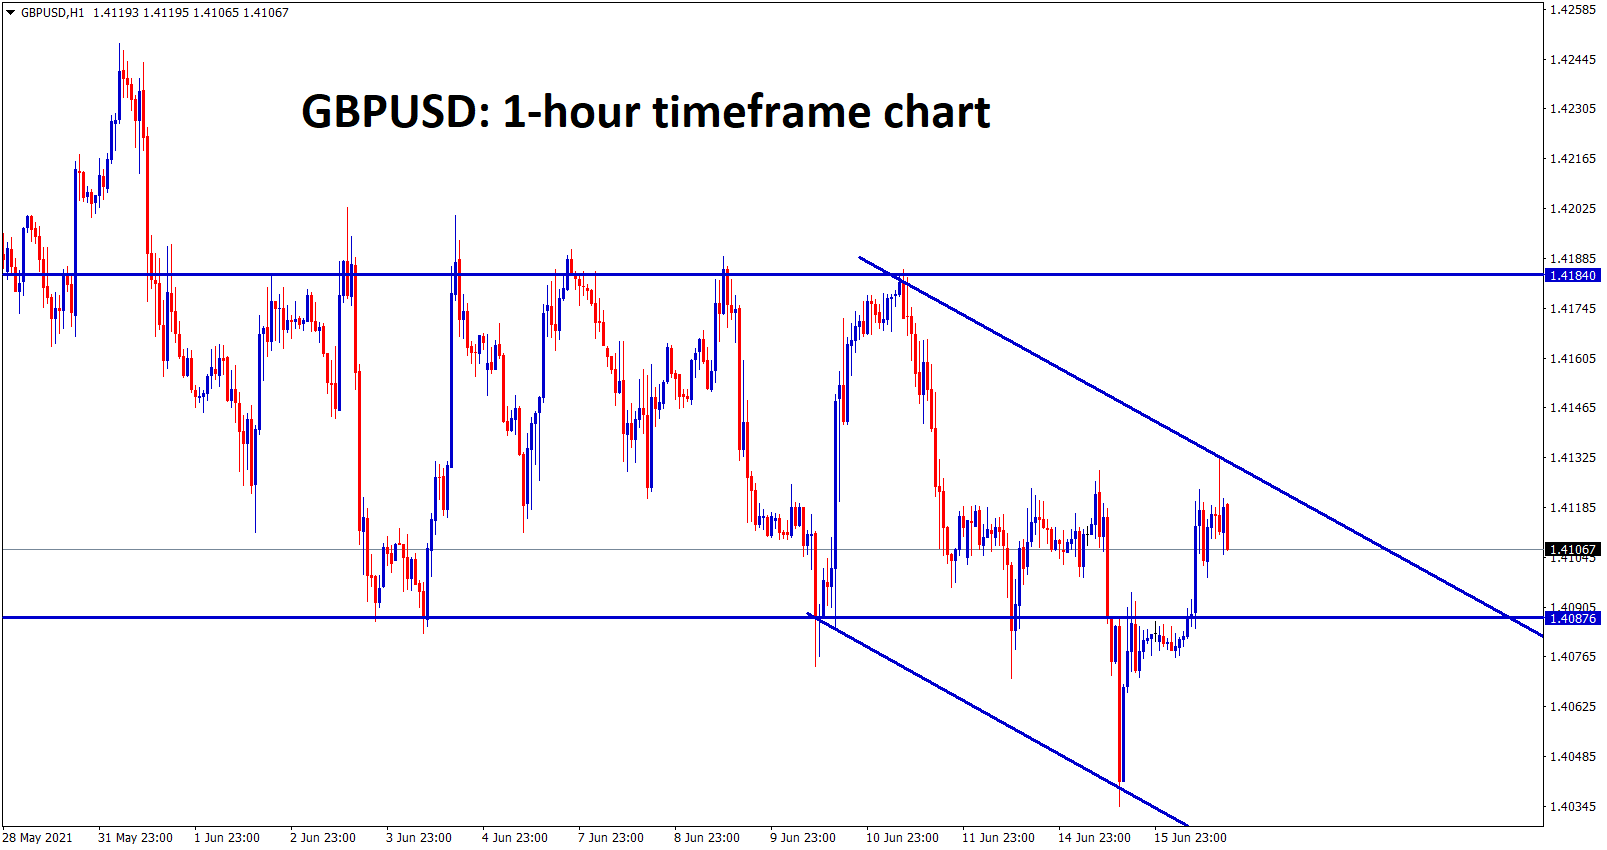 GBPUSD is moving between the channel and SR ranges